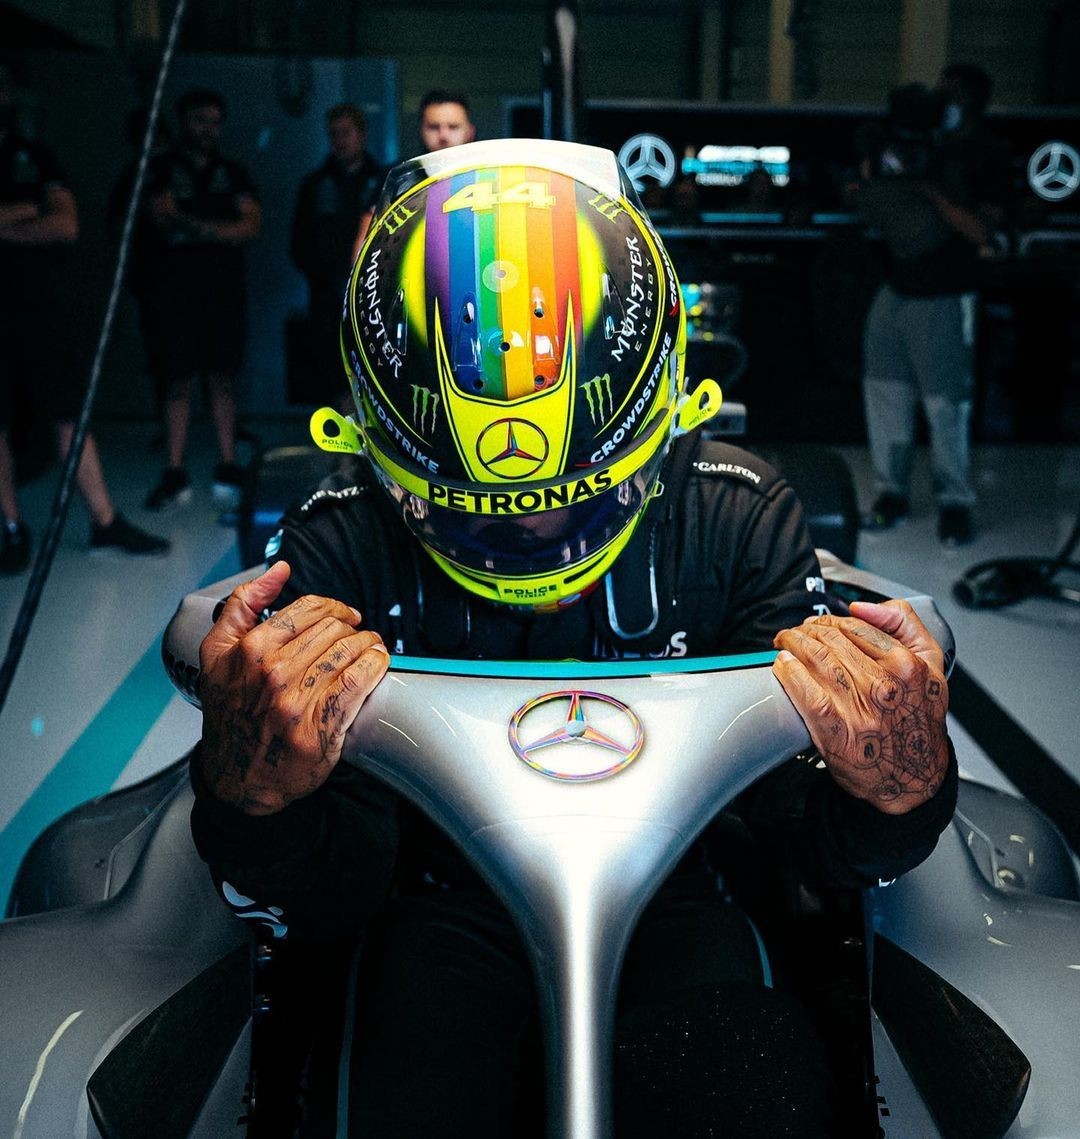 after-his-p3-at-silverstone-lewis-hamilton-says-it-feels-good-to-be-back-in-the-fight_2.jpg